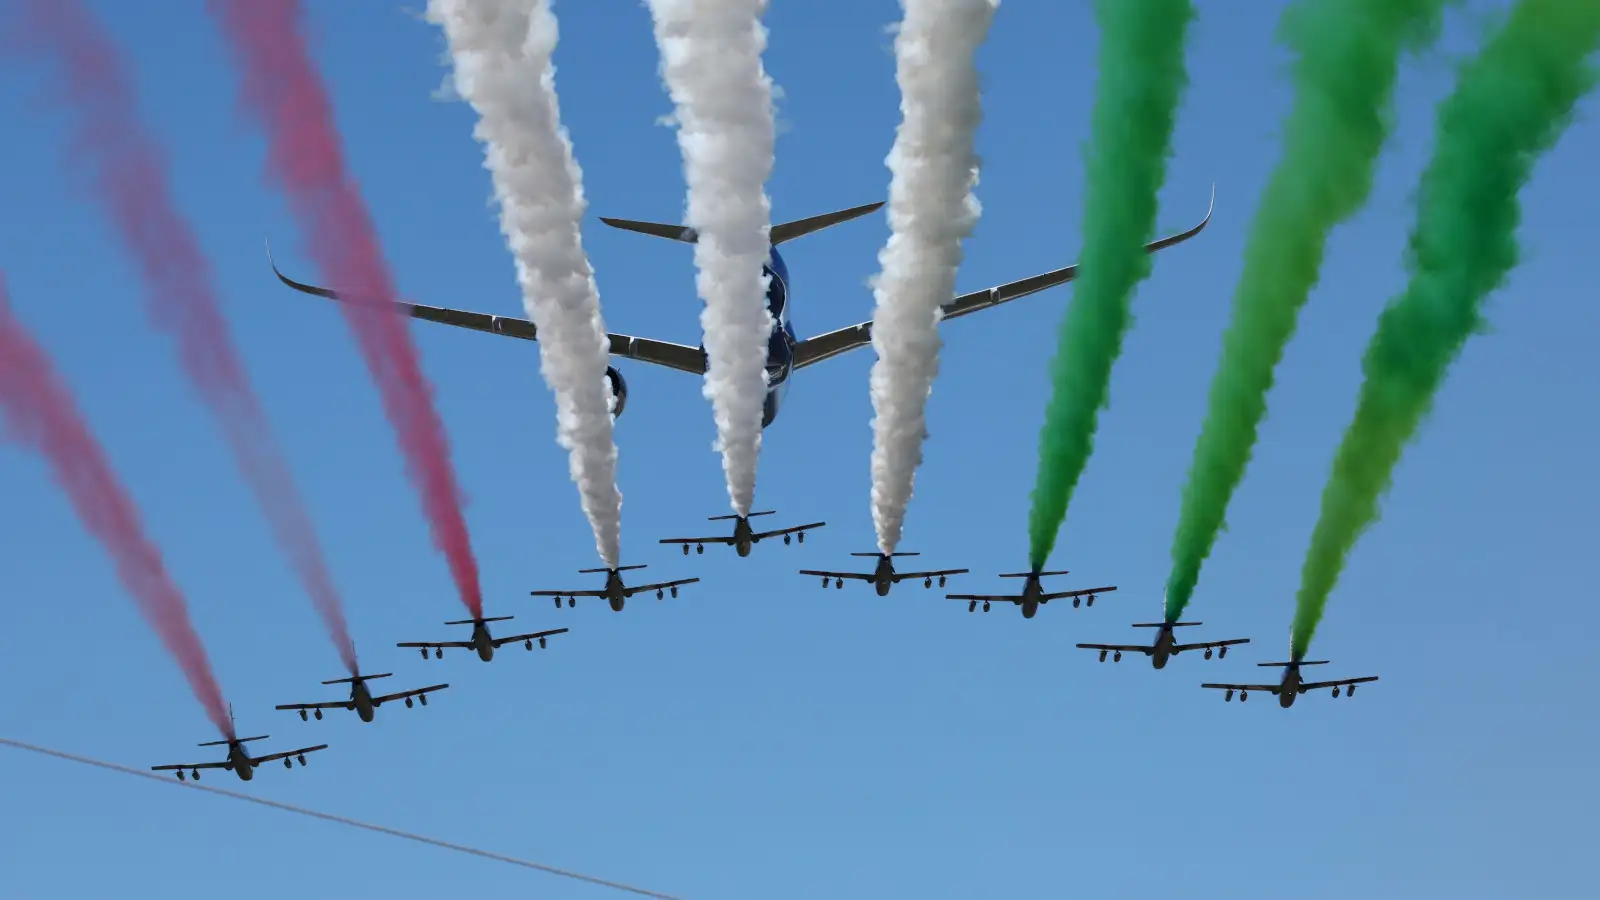 A flypast at Monza including a military plane and nine jets. Italy September 2022